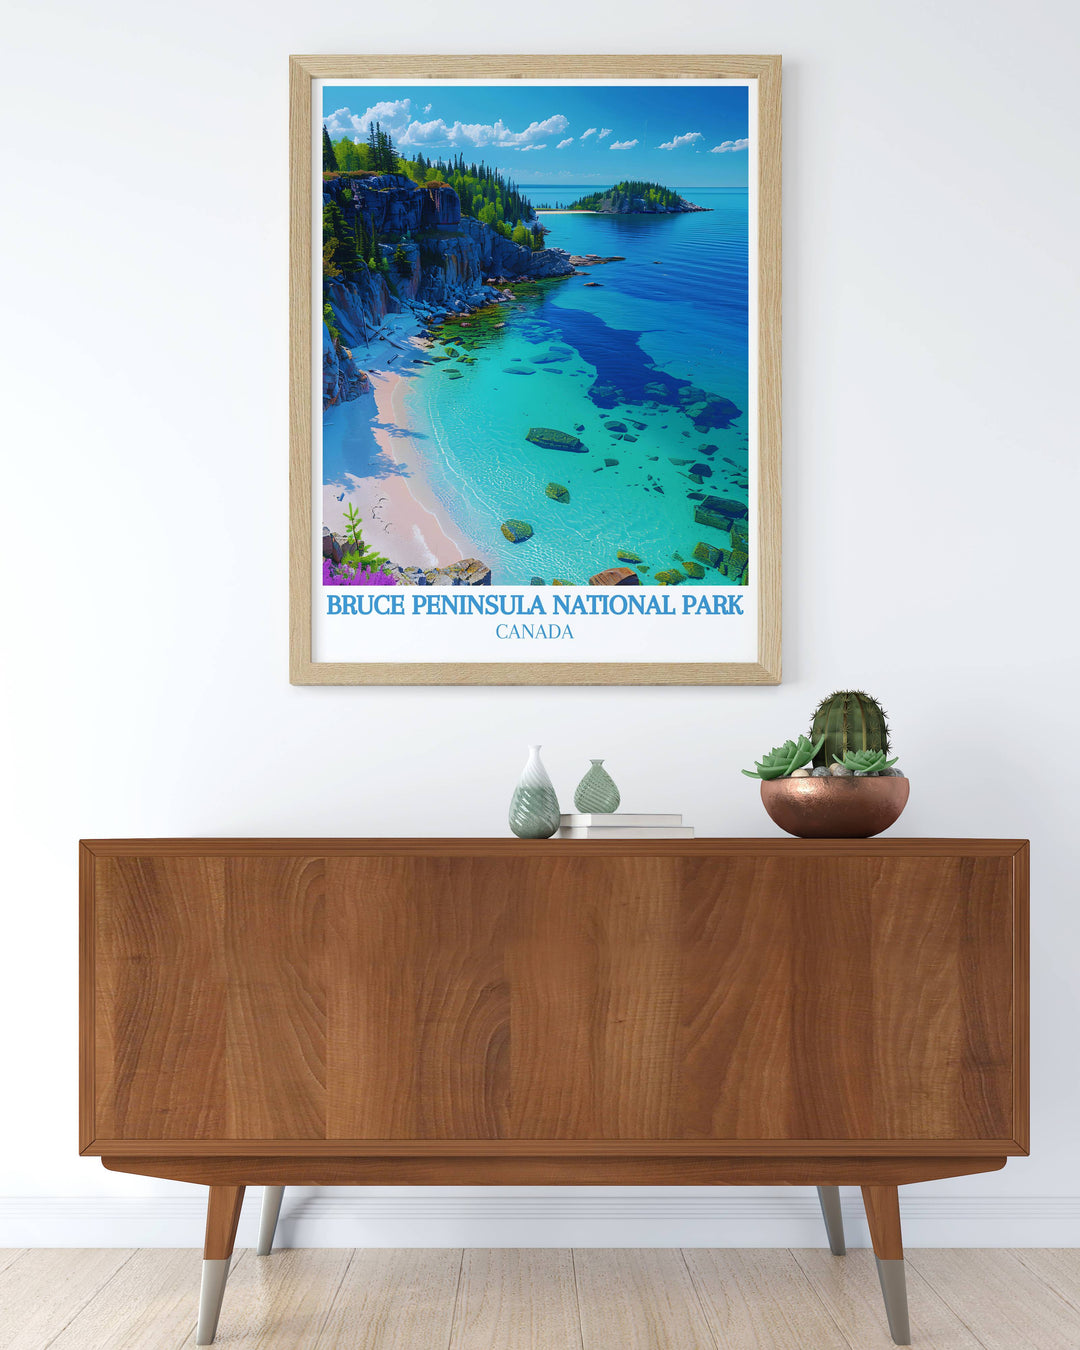 The Flowerpot Island Wall Art beautifully depicts the distinctive flowerpot shaped rock formations and crystal clear waters of this Canadian treasure adding elegance and tranquility to any room in your home with its detailed craftsmanship